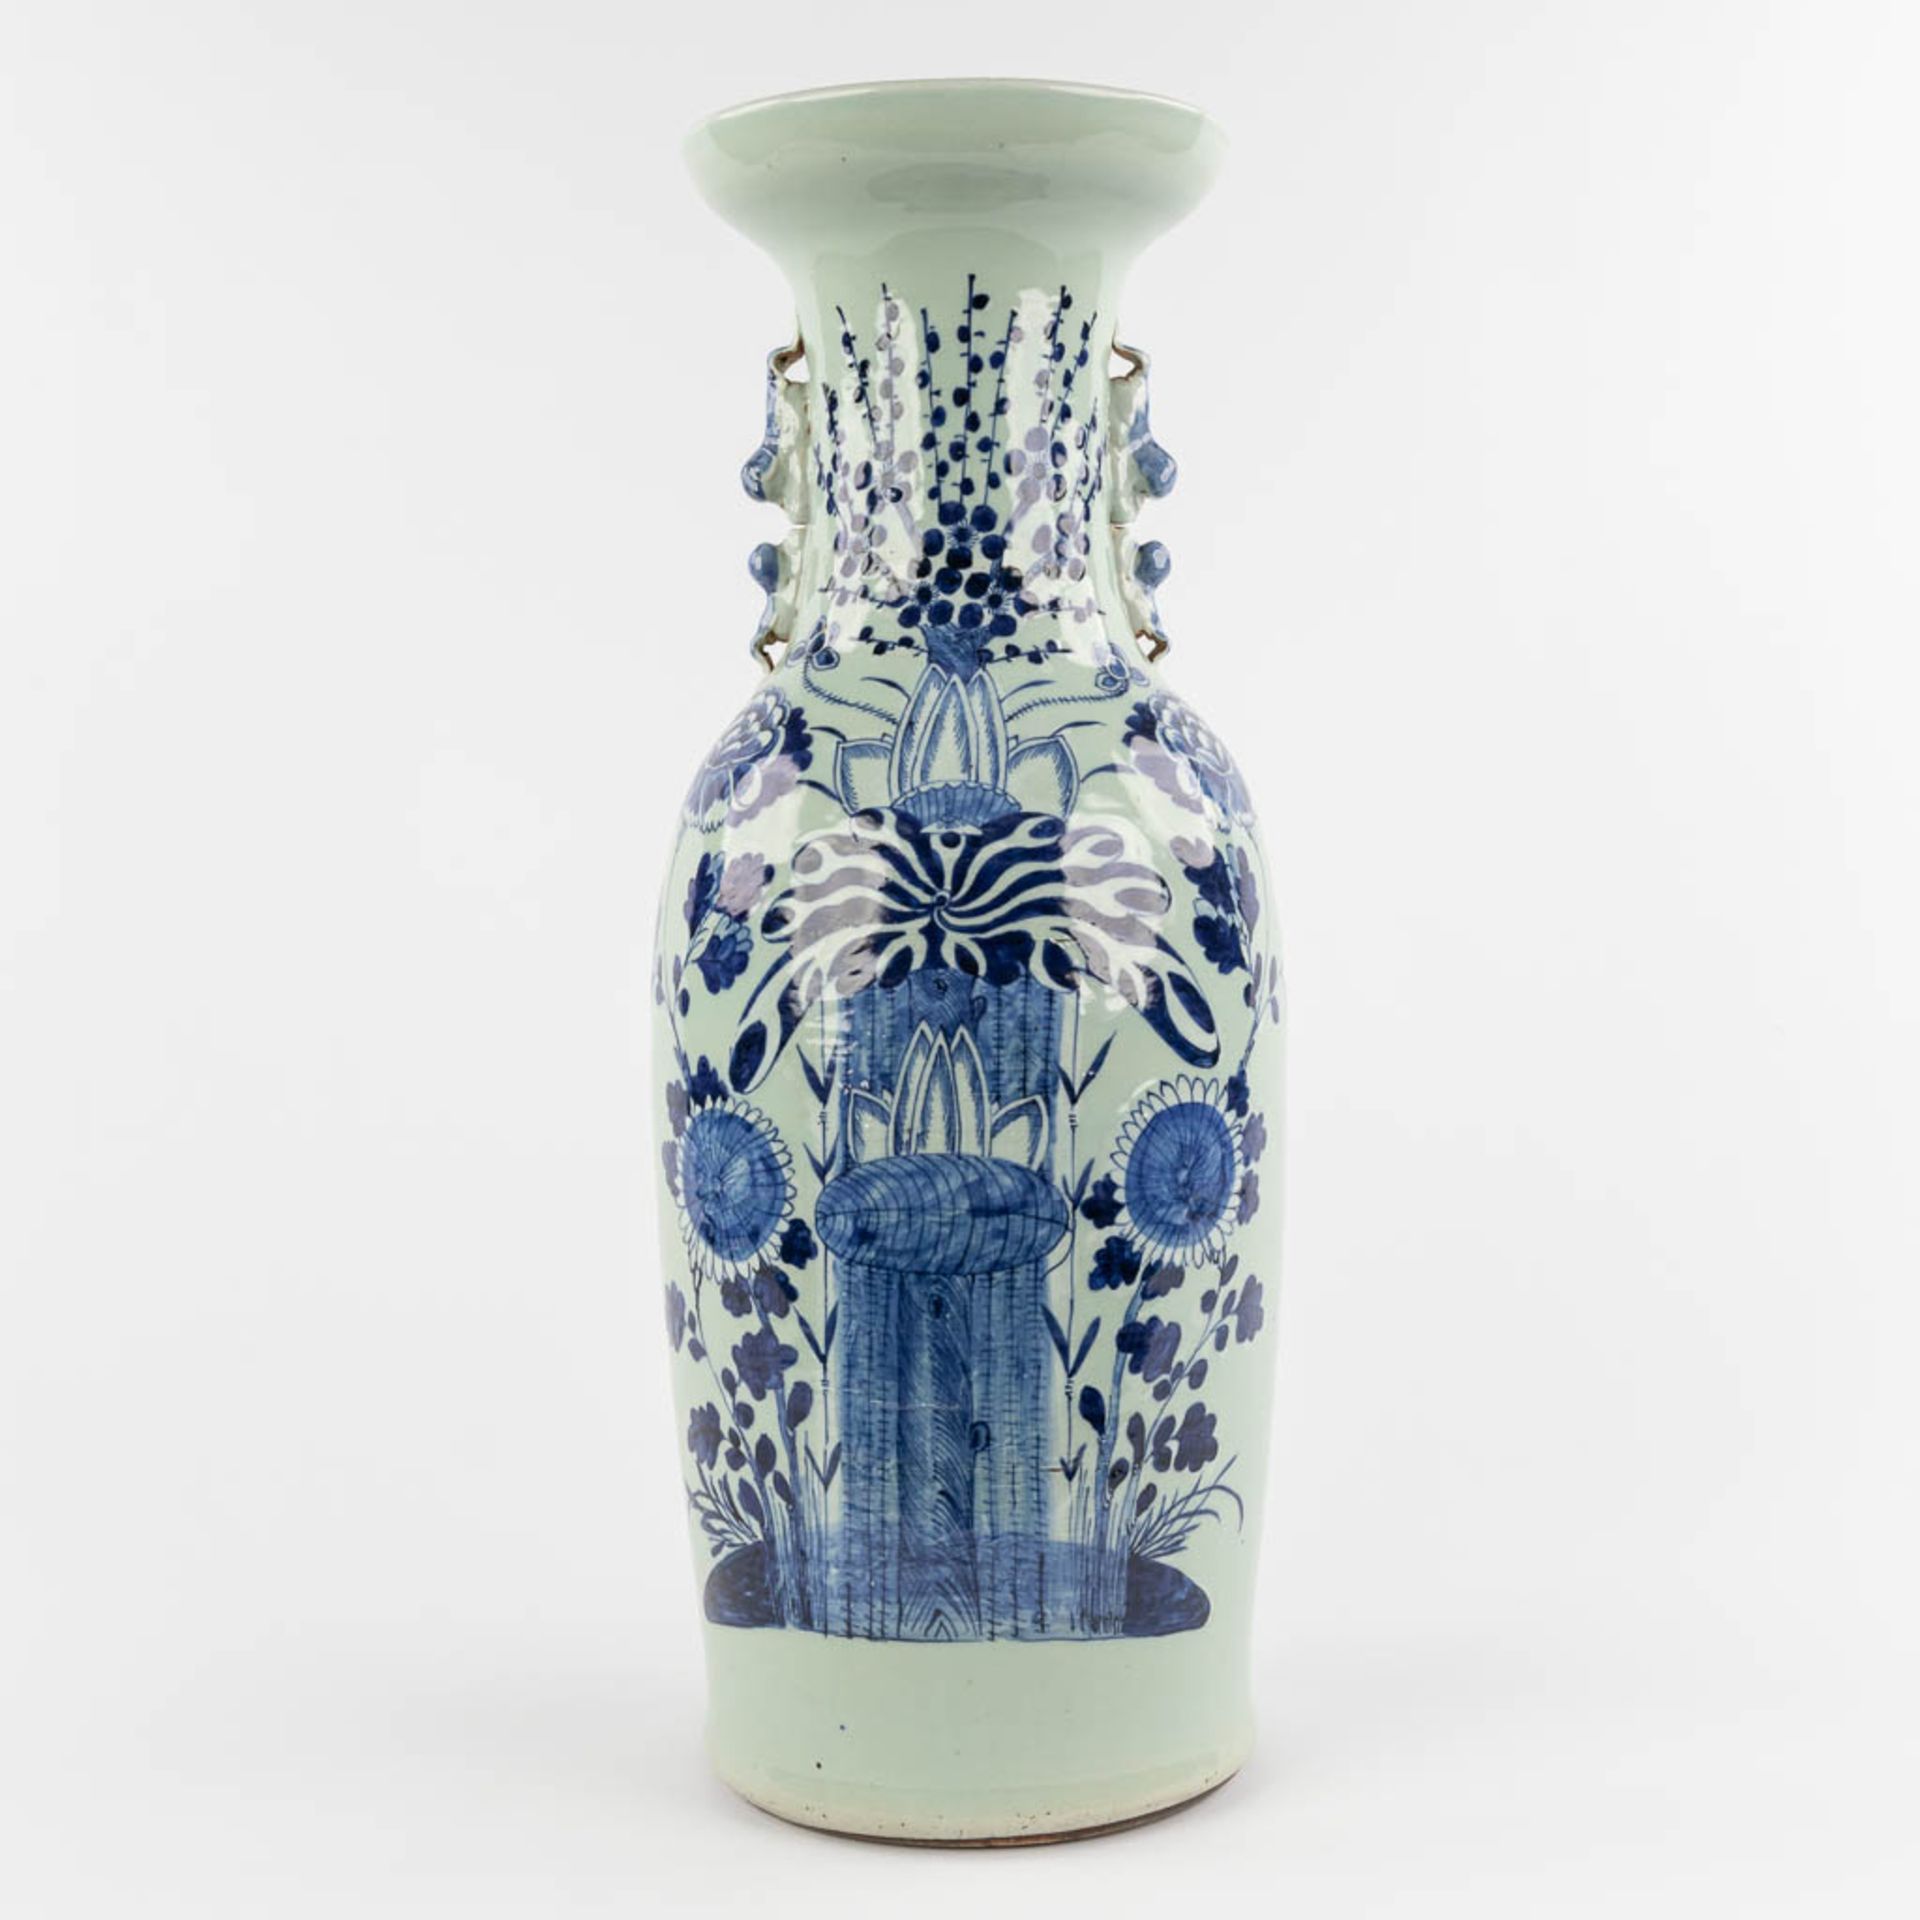 A Chinese Celadon vase with floral decor. 19th/20th C. (H:59 x D:21 cm)